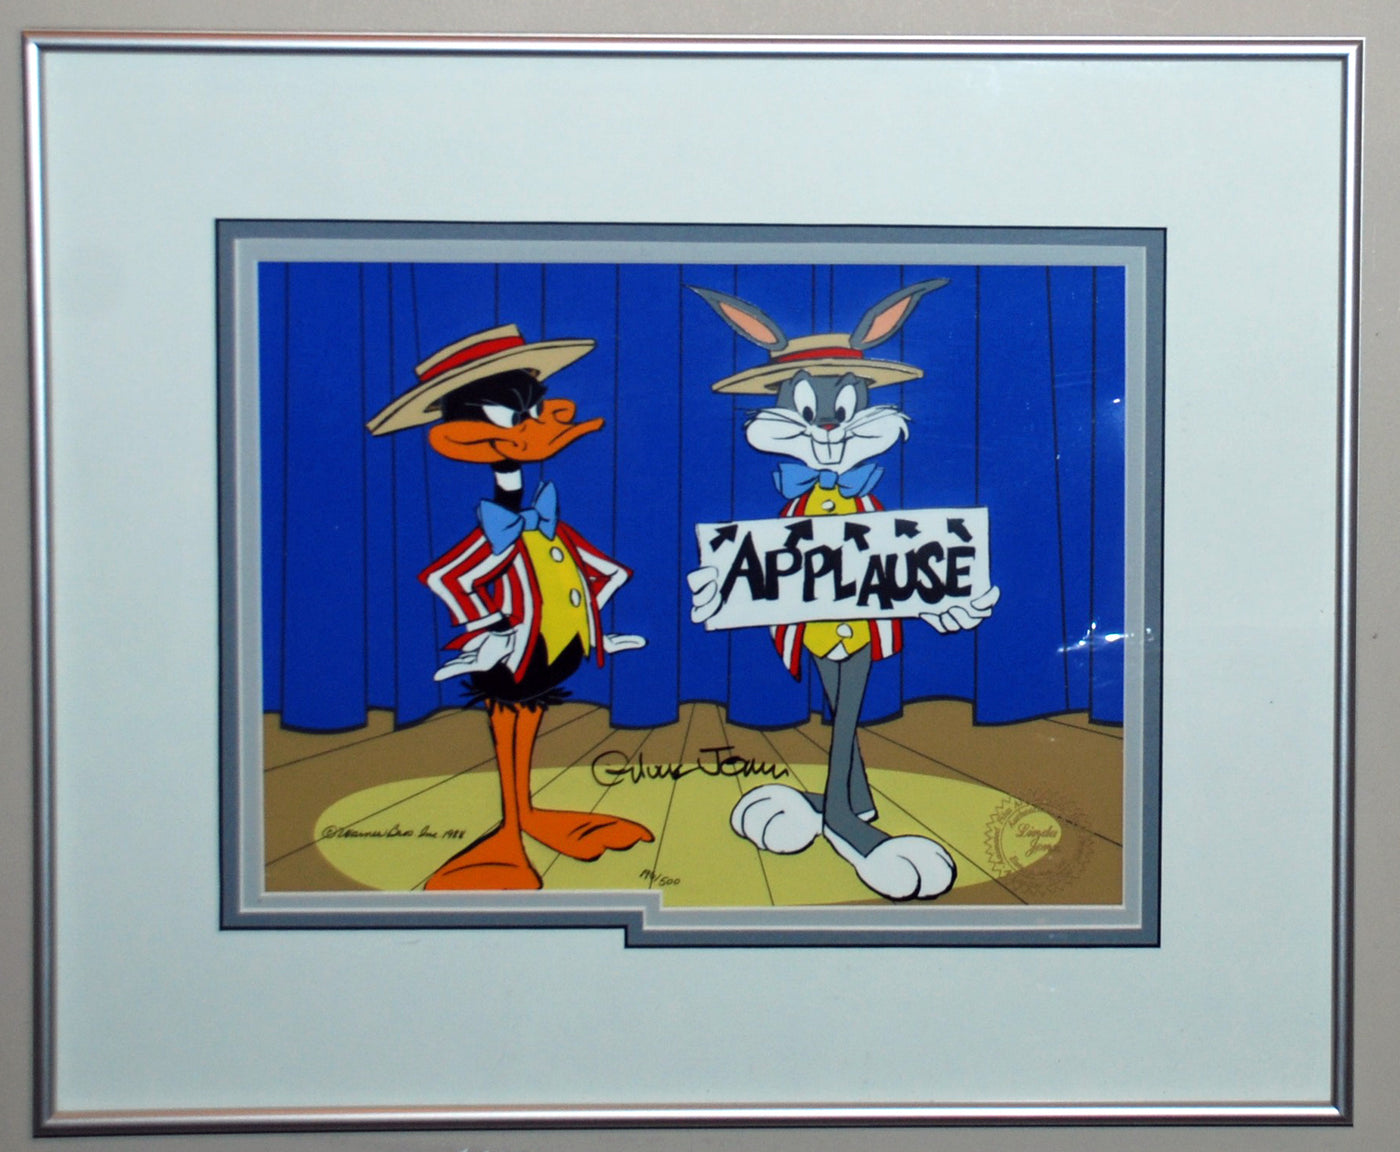 Original Warner Brothers Limited Edition Cel, Applause, Signed by Chuck Jones